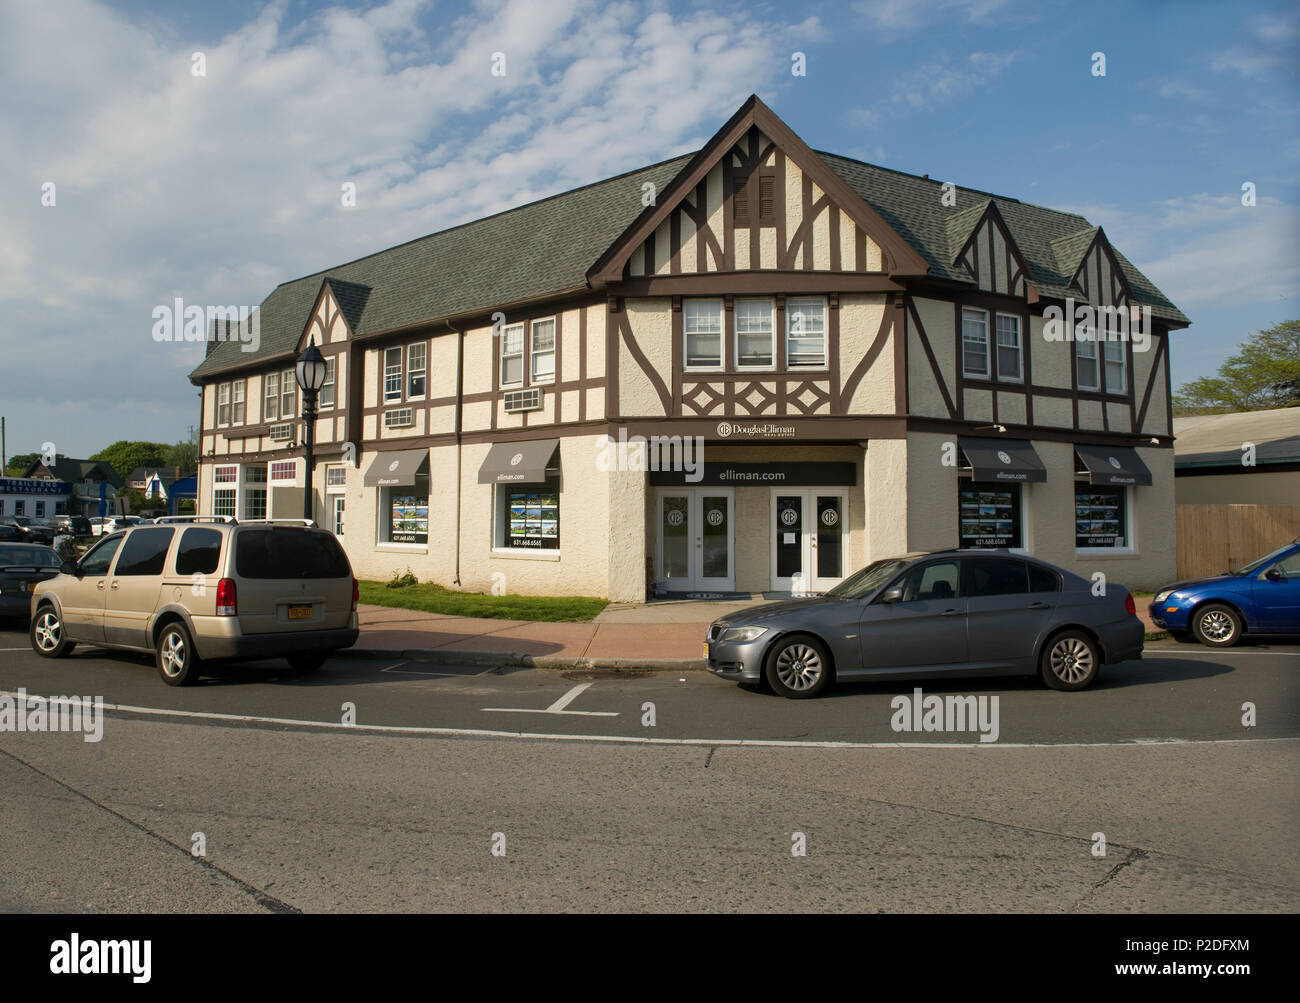 MONTAUK, NEW YORK-JUNE 8: English Tudor style architecture is seen on historic Fisher inspired building in village green downtown Montauk, New York, T Stock Photo